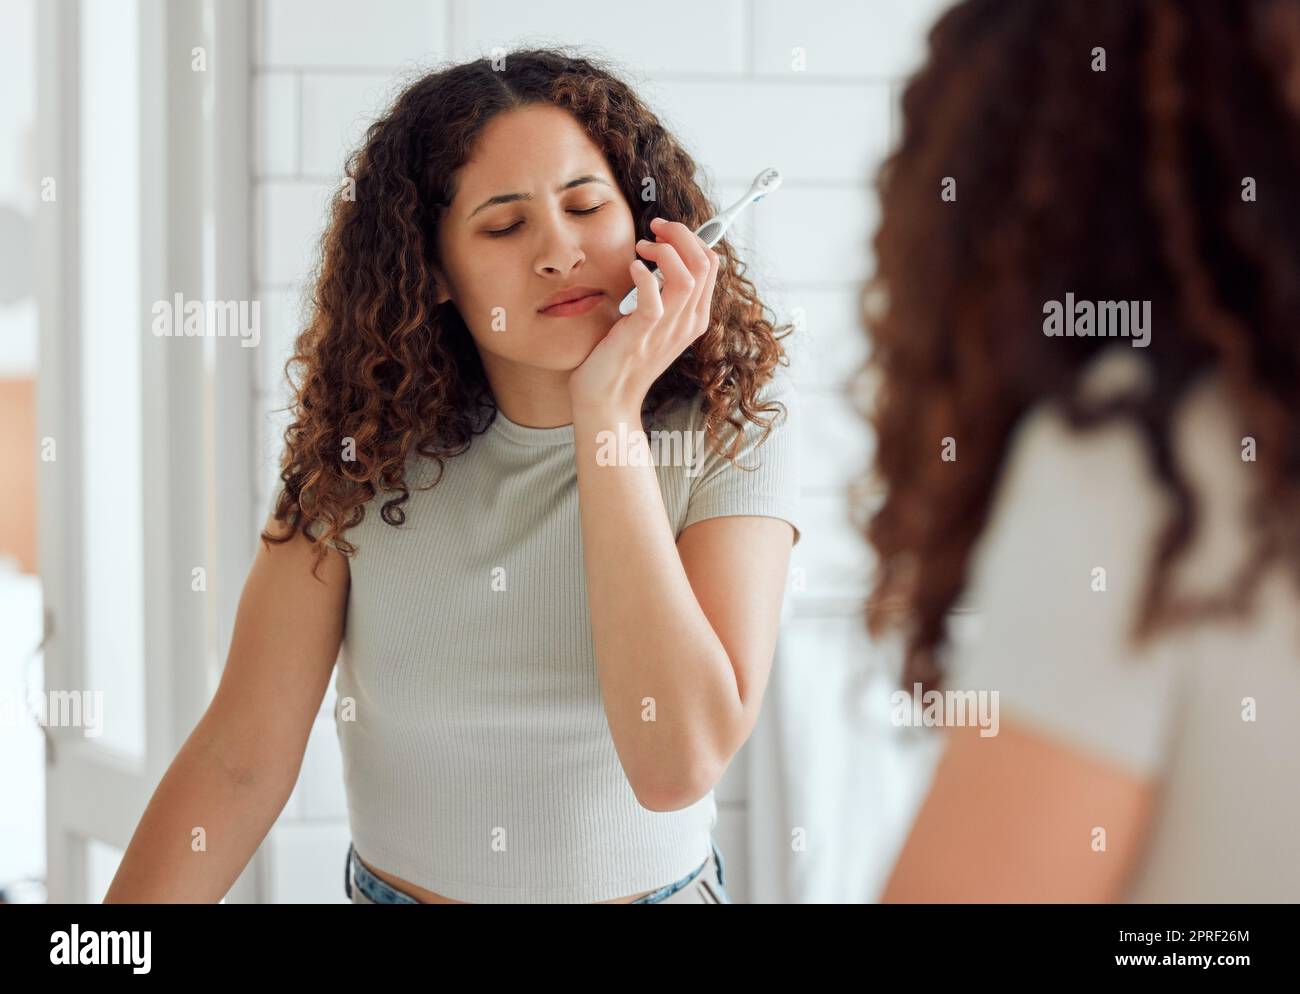 Toothache, oral pain and dental sensitivity for a woman brushing her teeth in the morning. African American female suffering with a painful, hurting or inflammation in her mouth in the bathroom Stock Photo